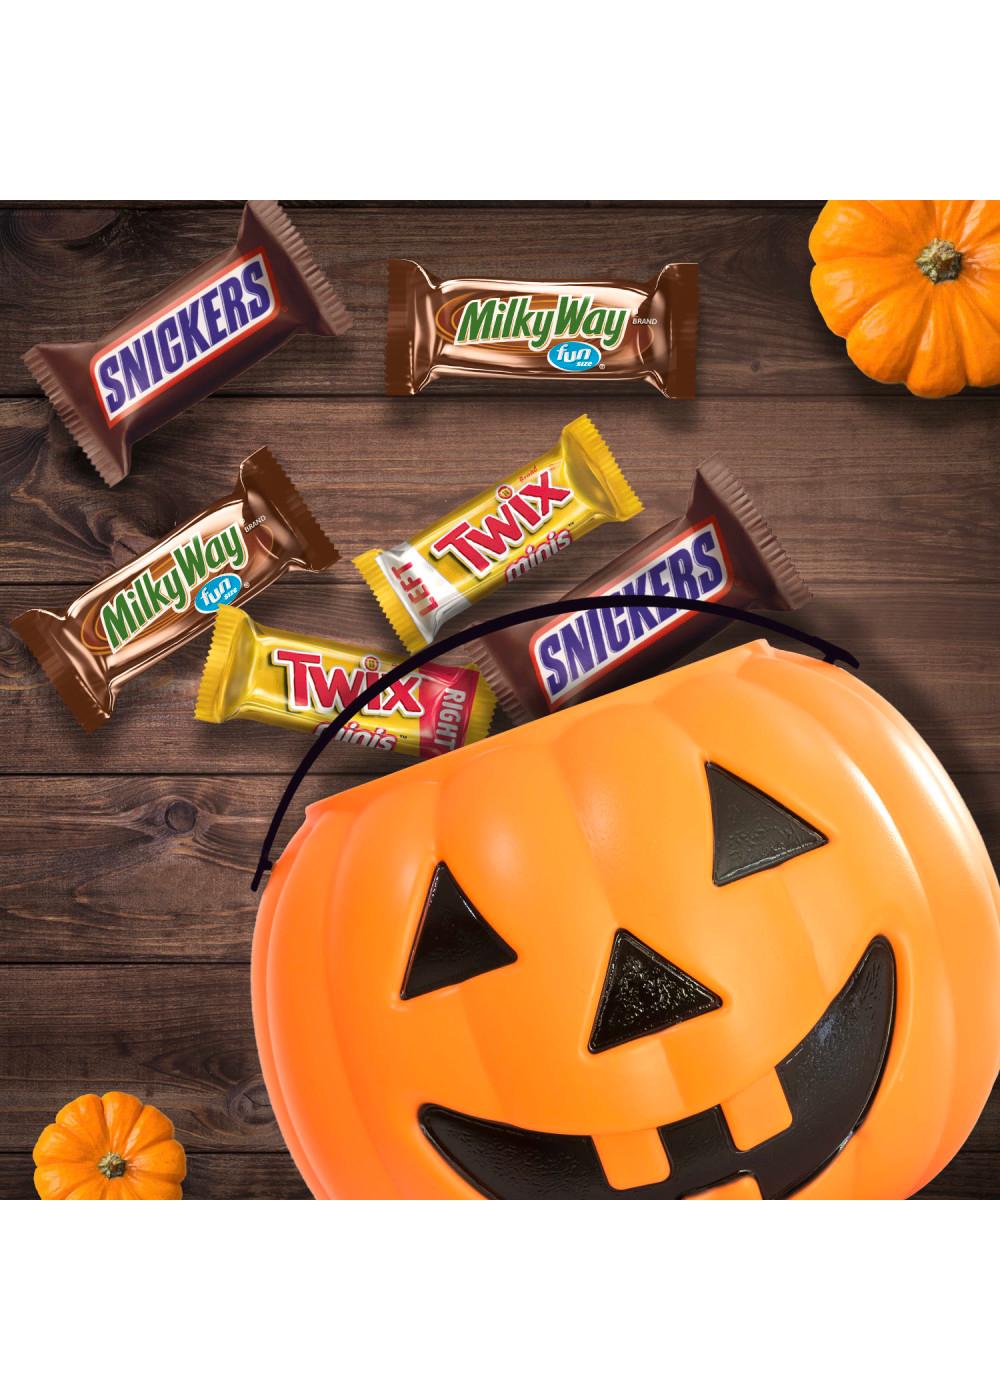 Snickers, Twix & Milky Way Assoted Fun Size Halloween Candy Bars; image 4 of 7